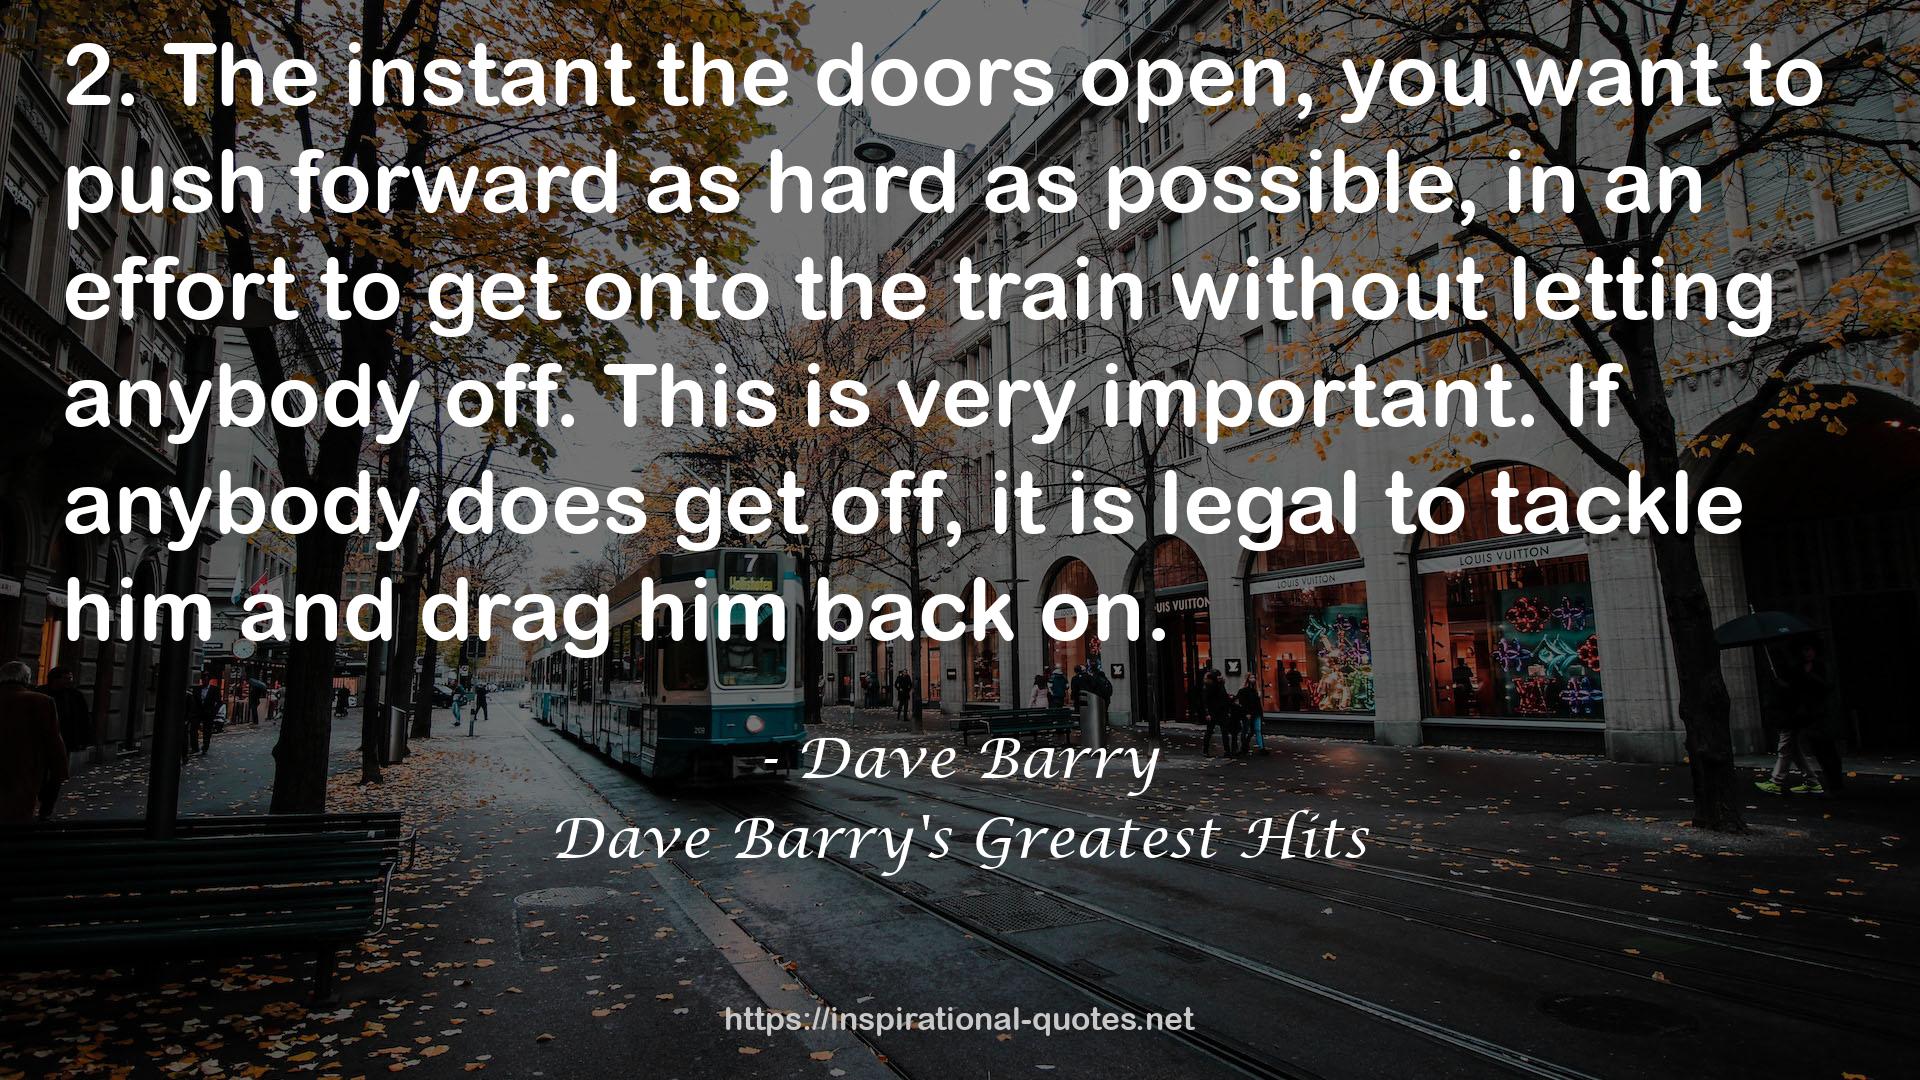 Dave Barry's Greatest Hits QUOTES